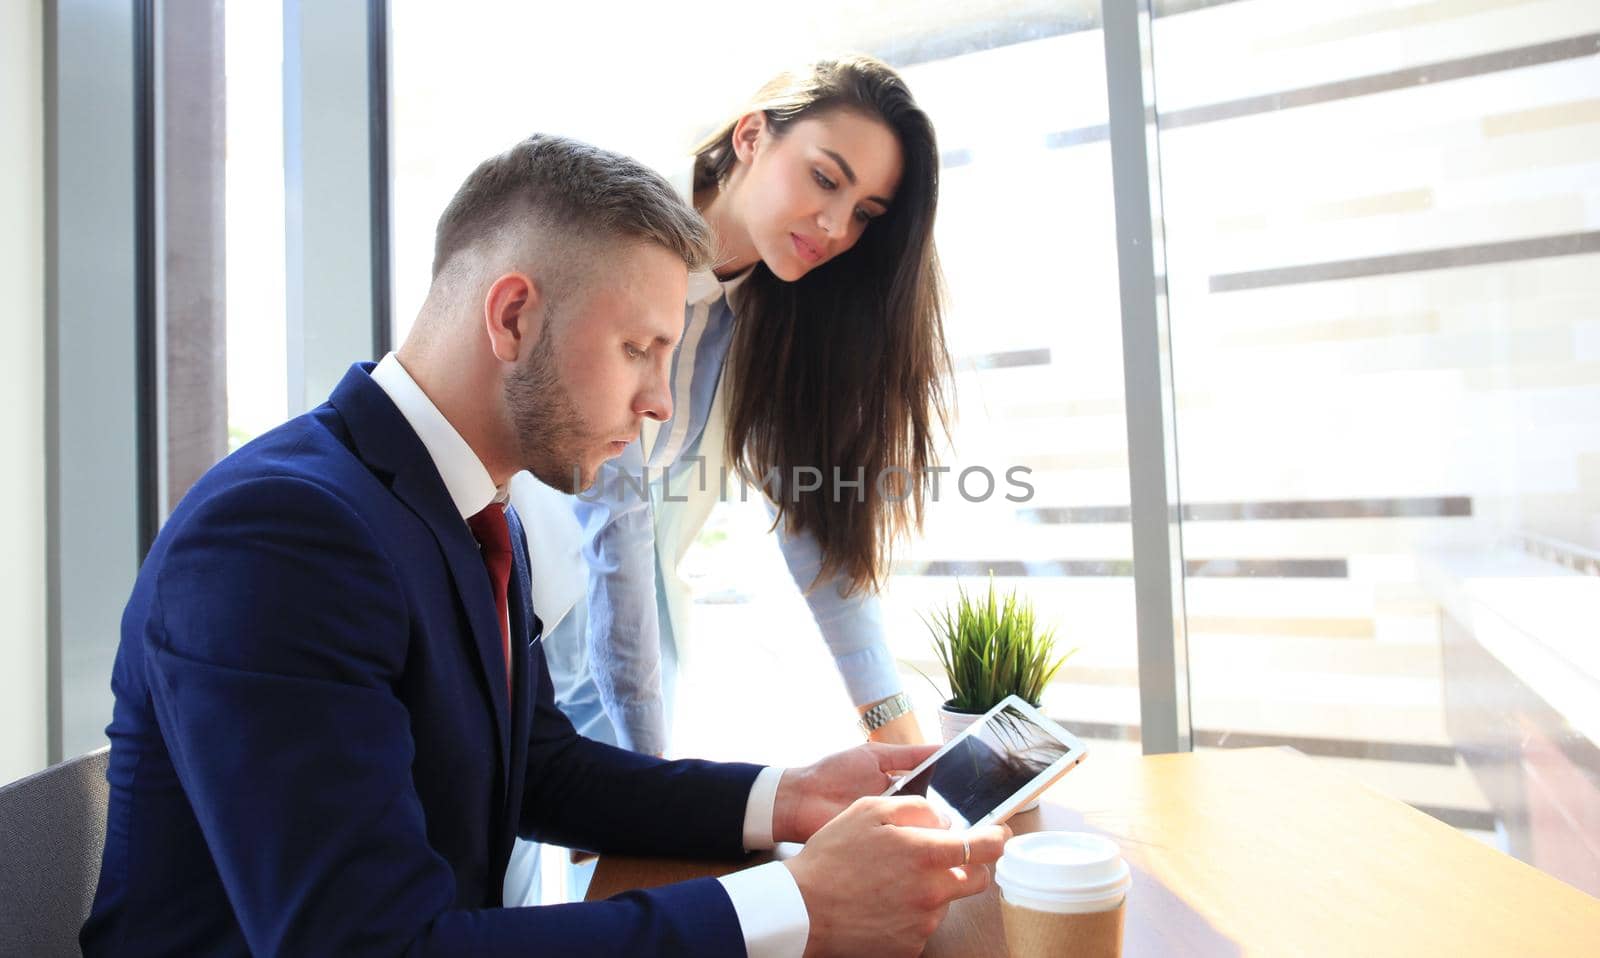 Image of two young business partners discussing plans or ideas at meeting by tsyhun